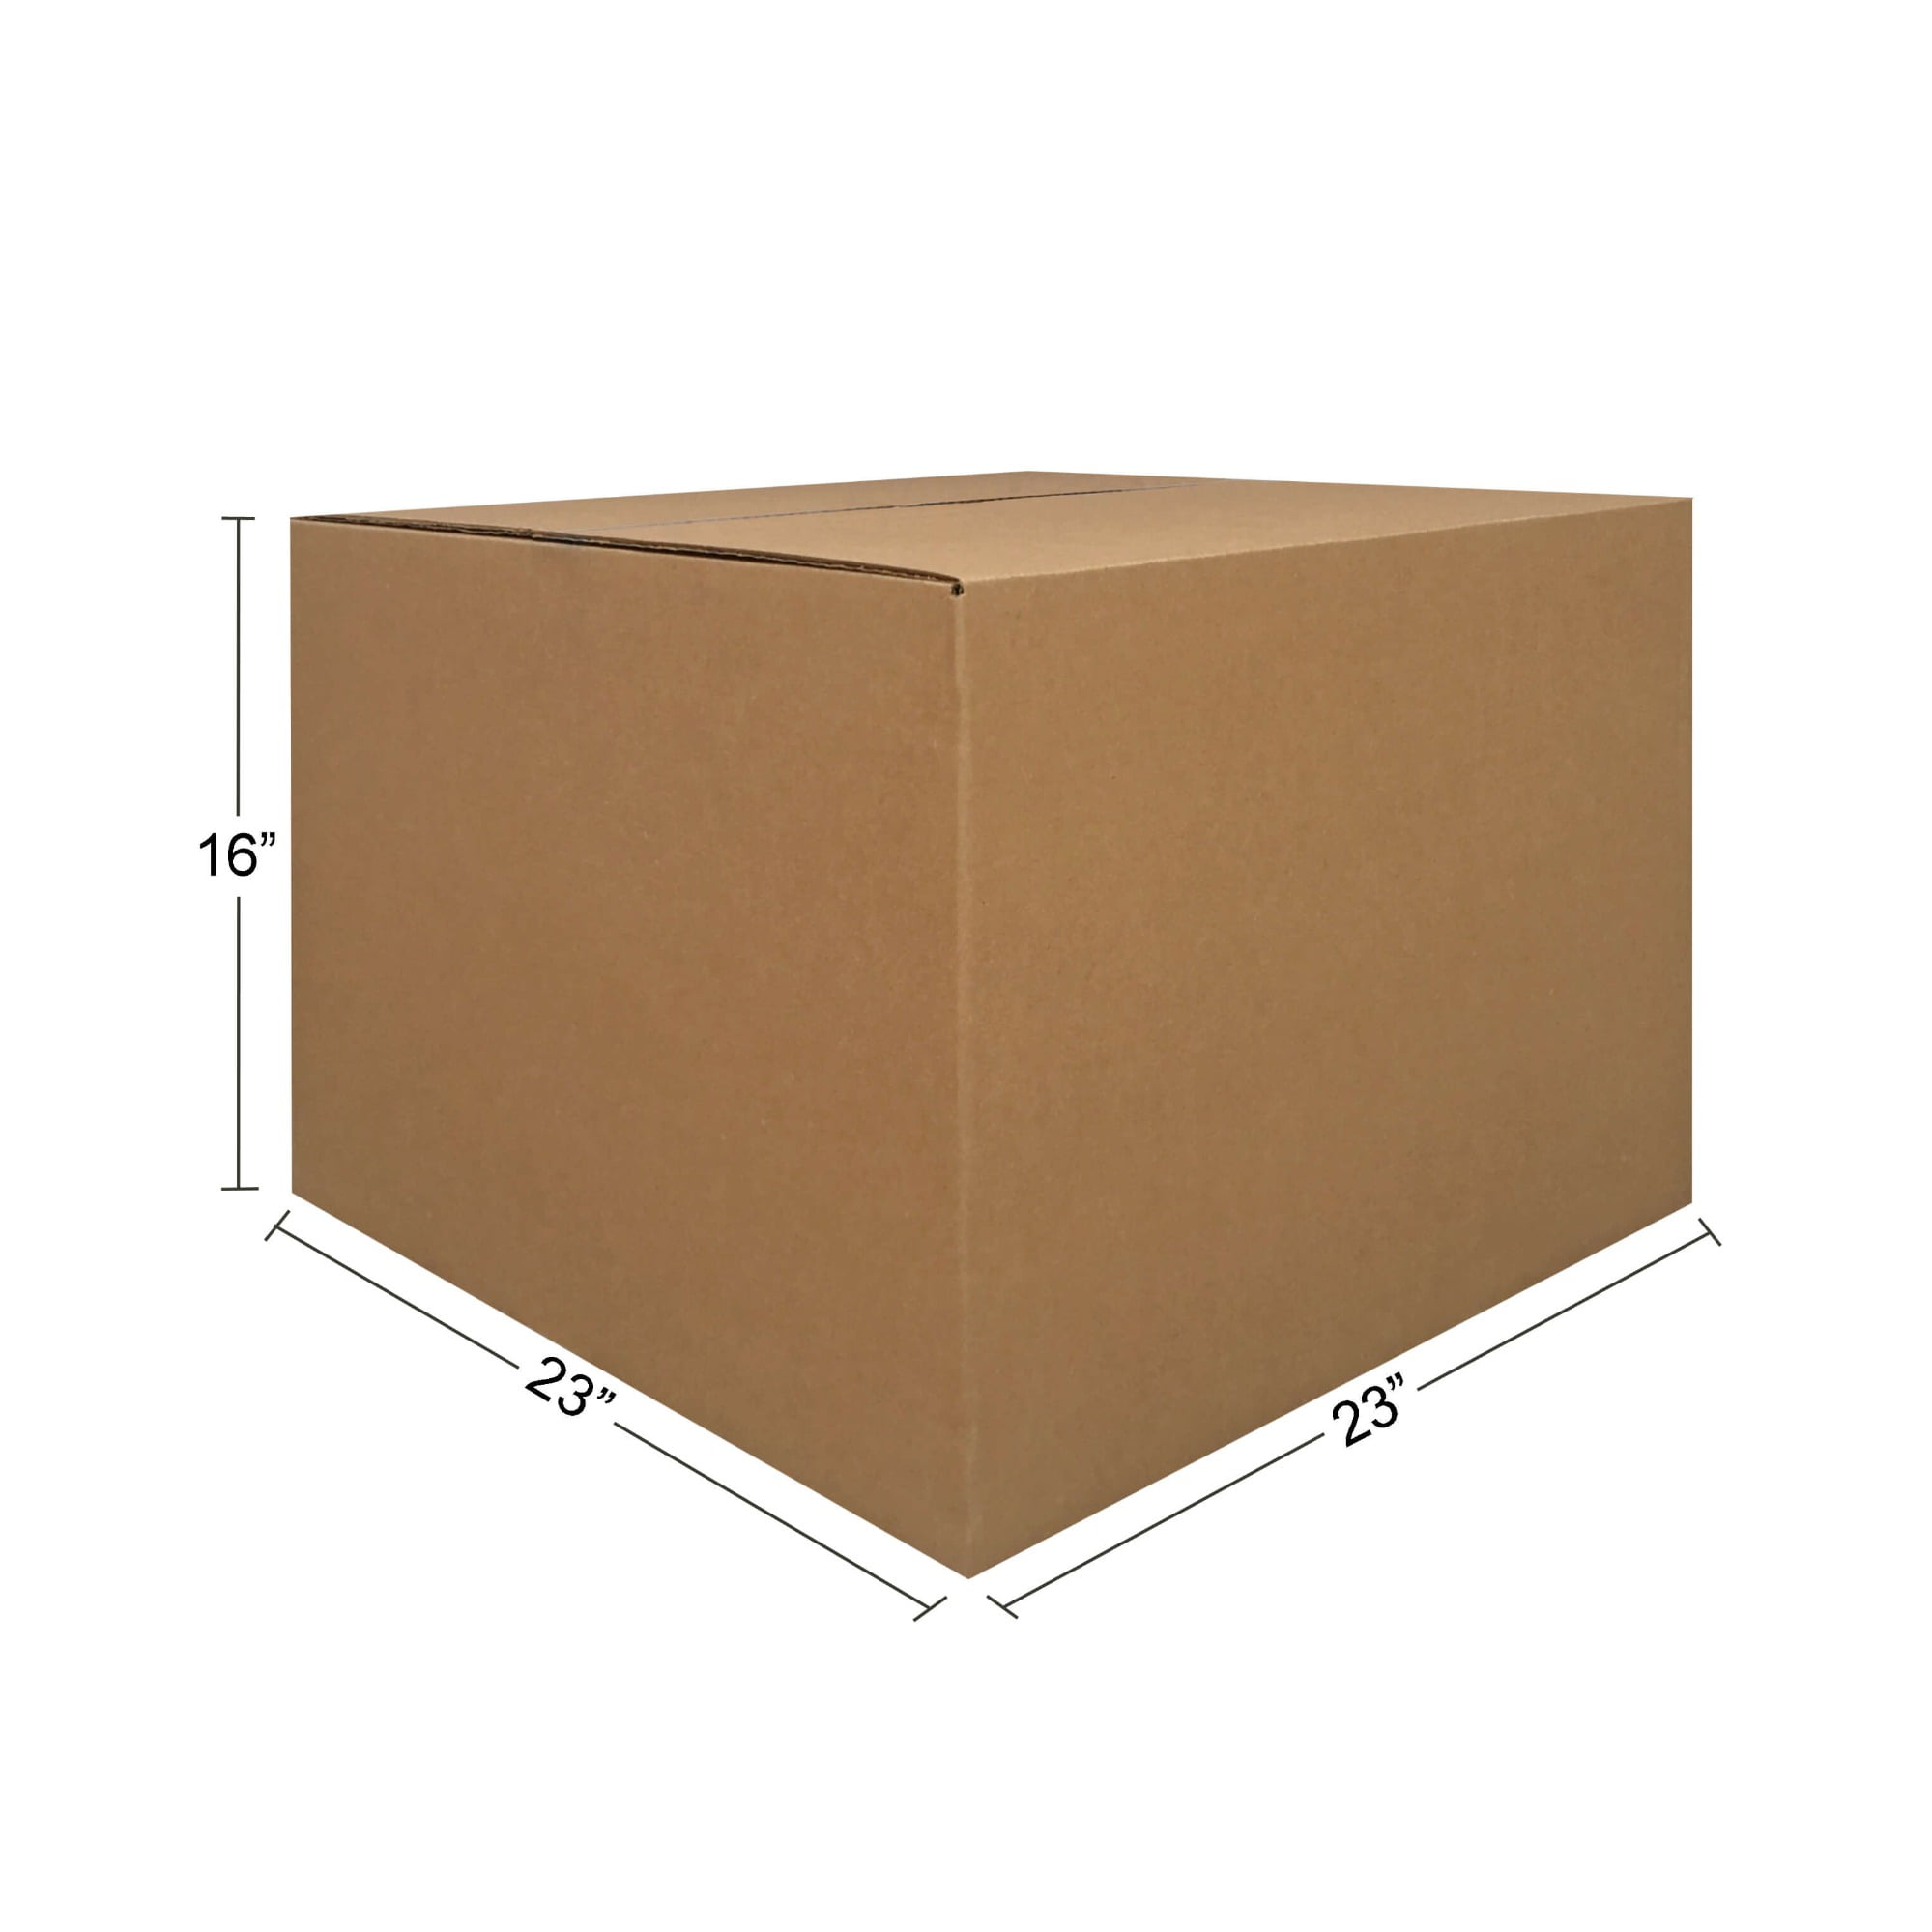 Uboxes 10 Extra Large Moving Boxes 23x23x16 Standard Corrugated Moving Box 23 x 23 x 16 2 Pack 